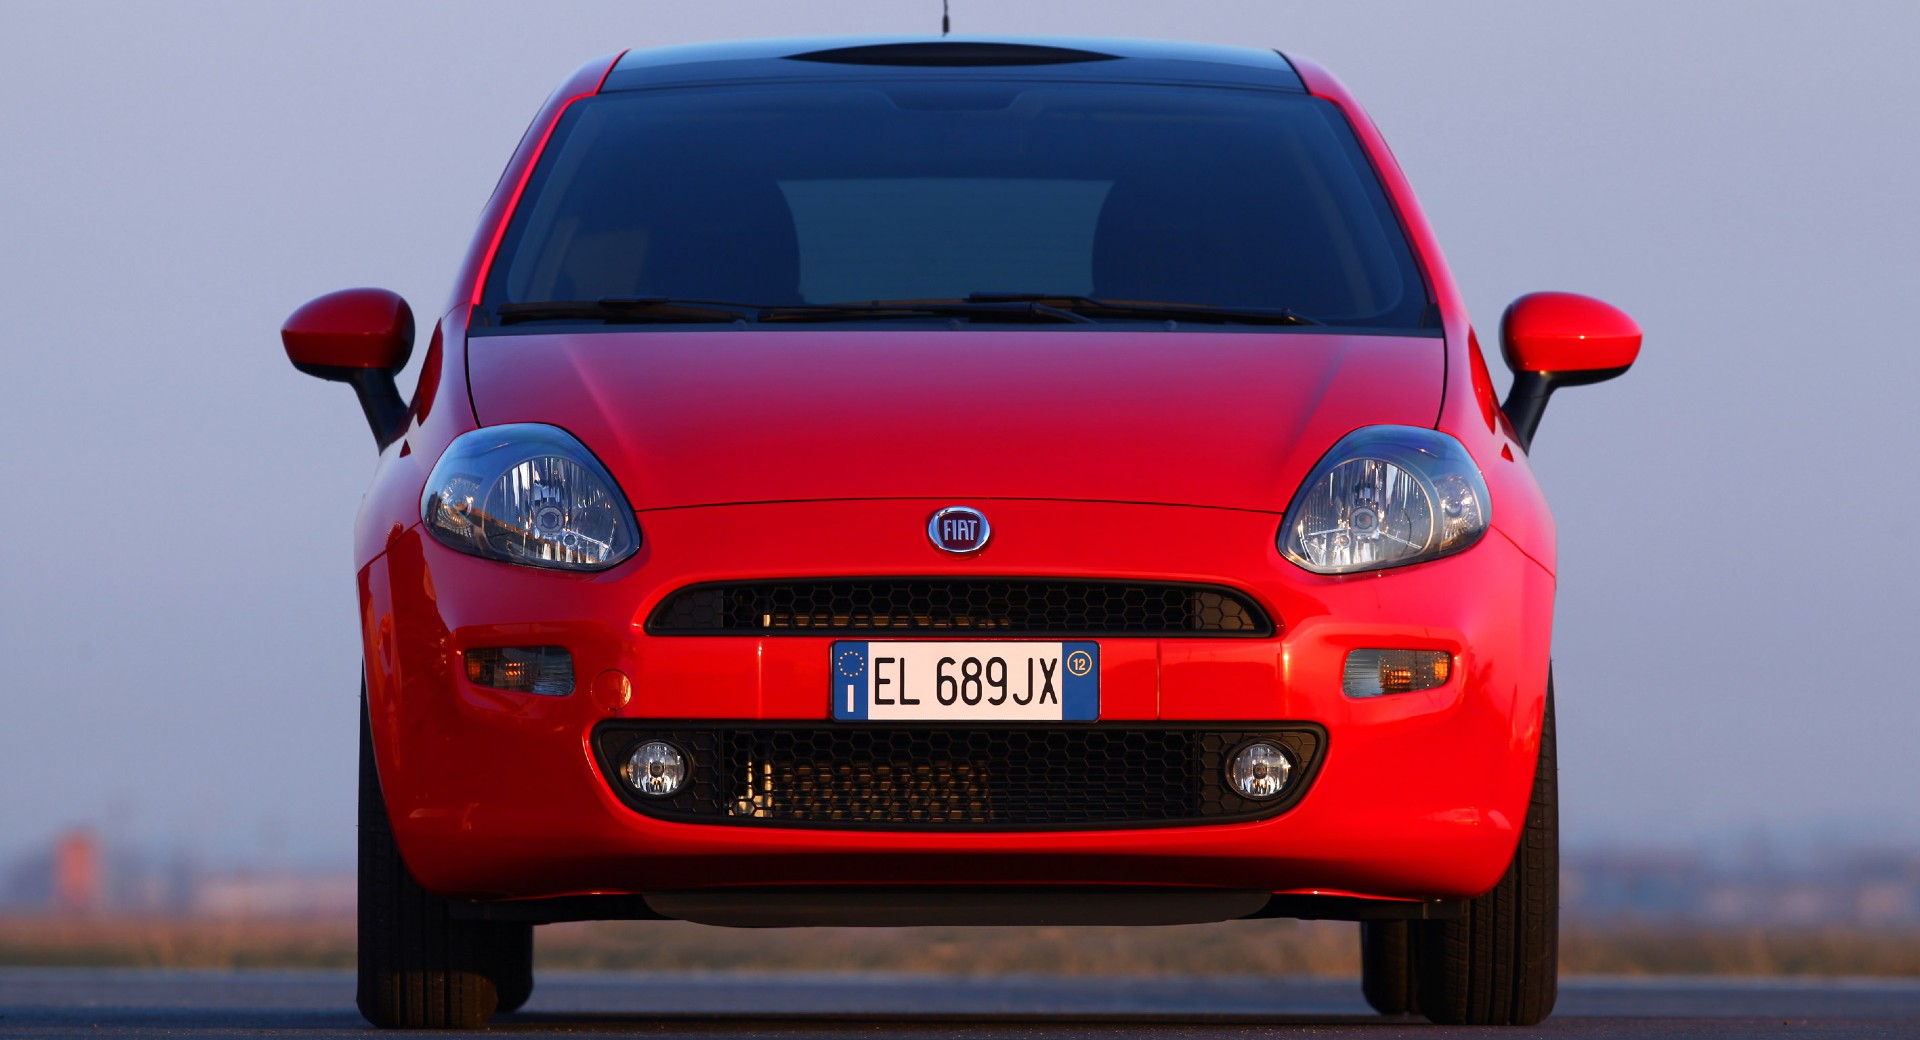 Fiat Grande Punto Review - Full detailed review, interior